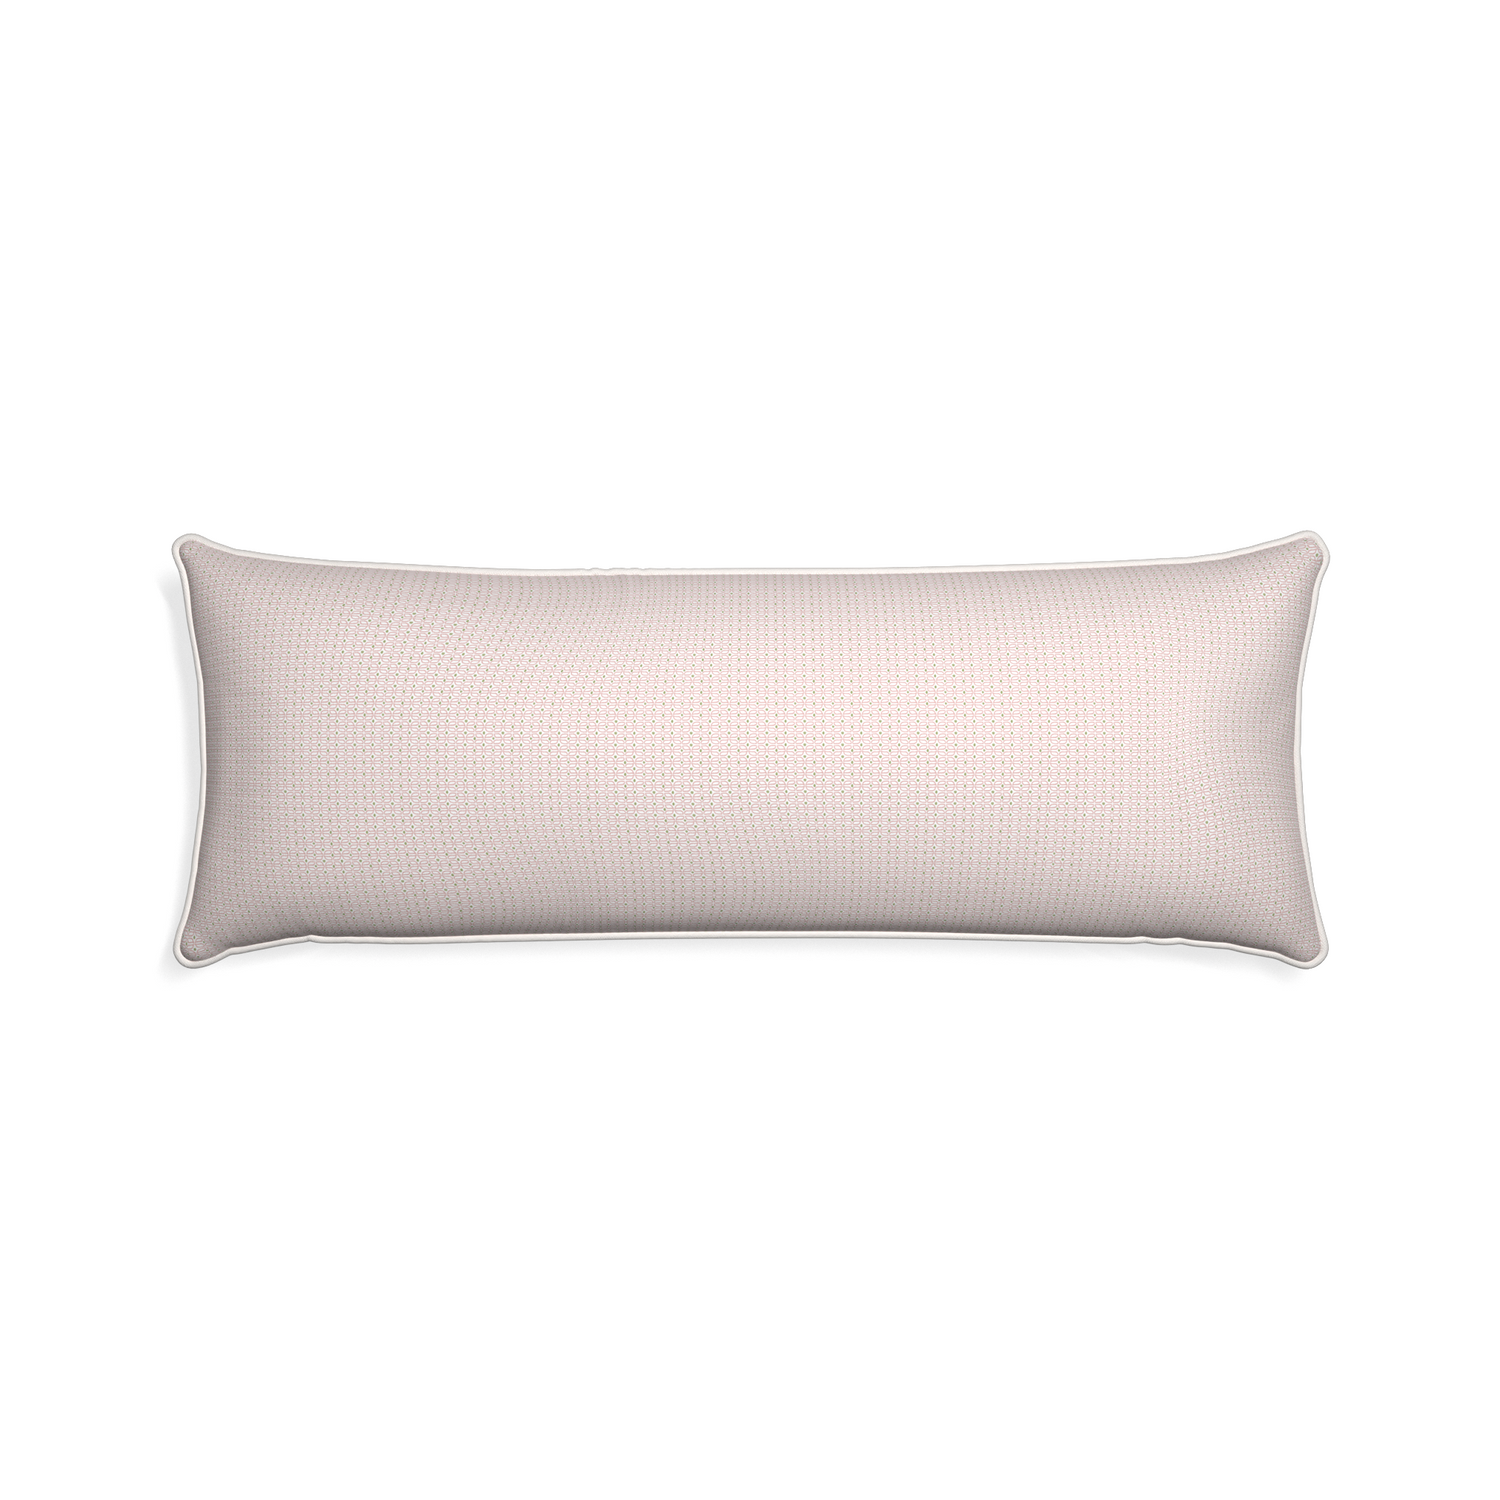 Xl-lumbar loomi pink custom pillow with snow piping on white background